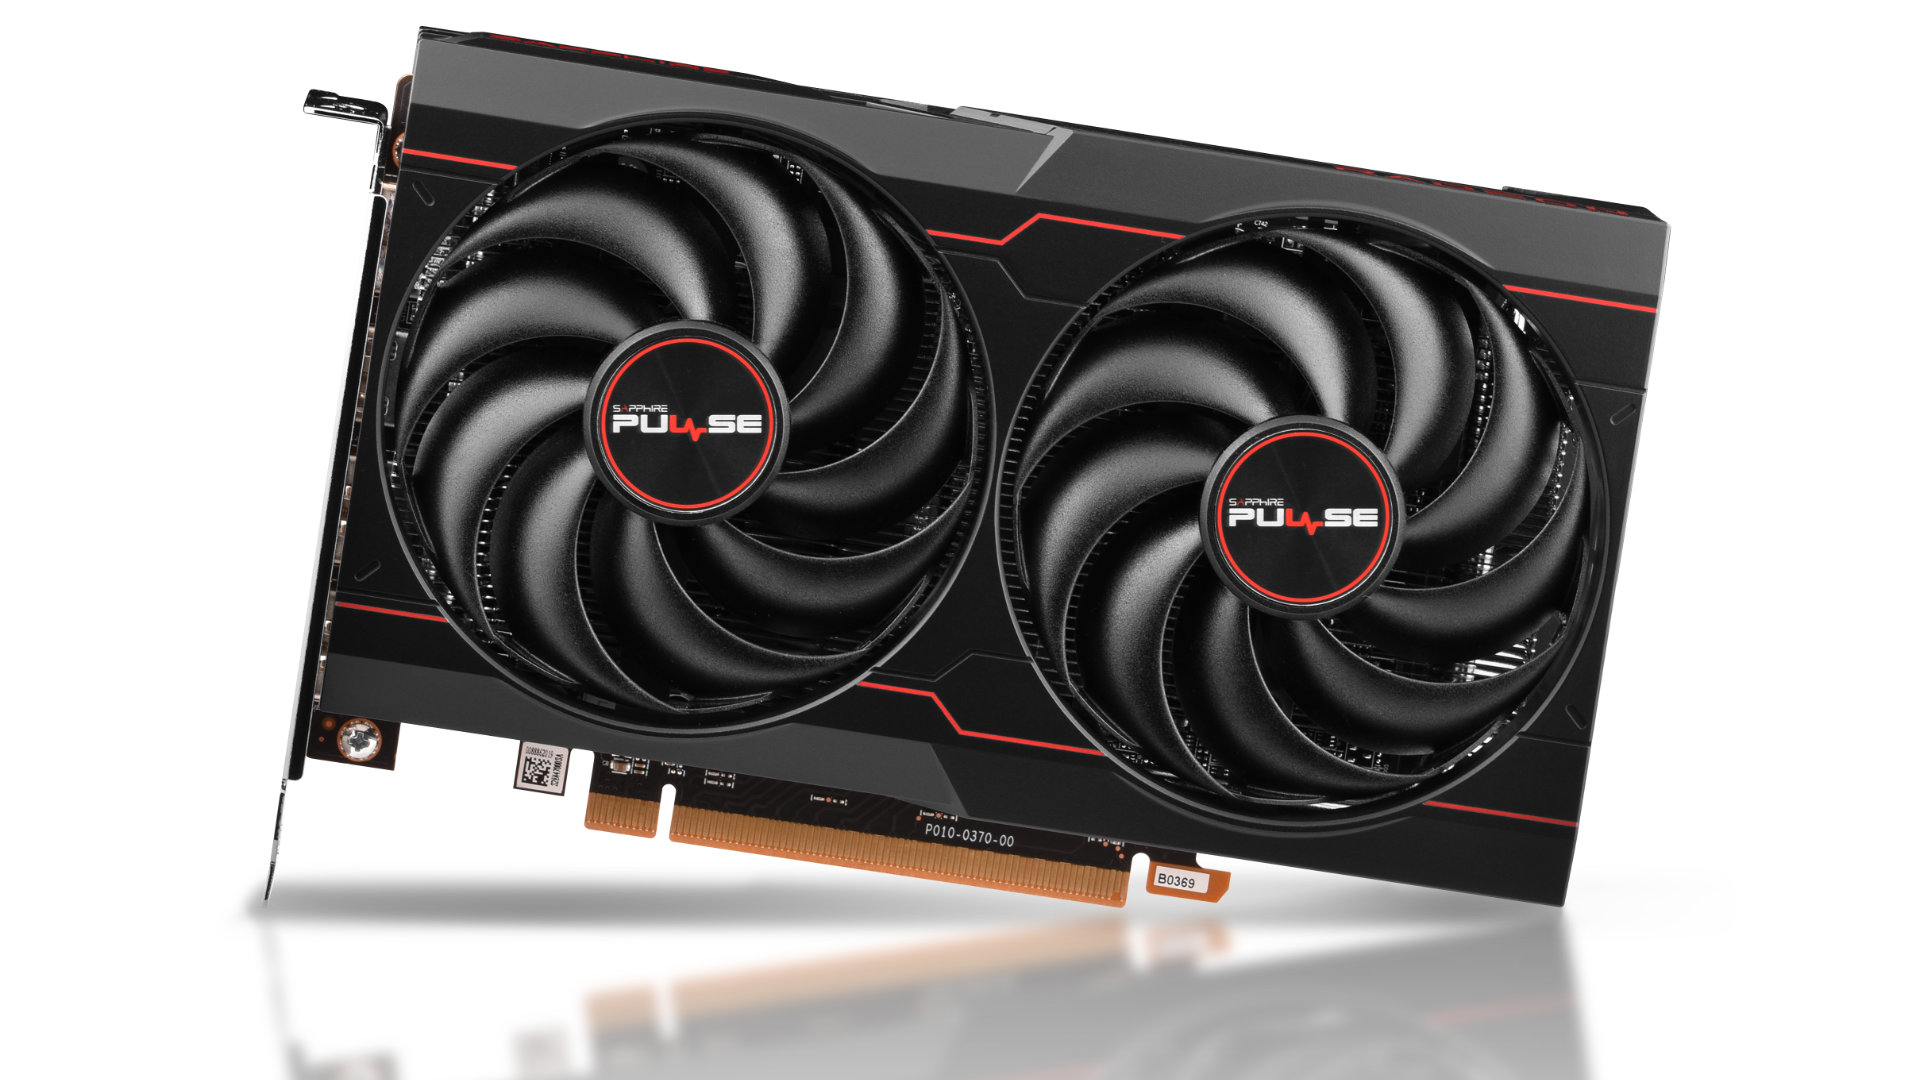 Sapphire is allegedly selling custom crypto mining AMD GPUs directly to miners